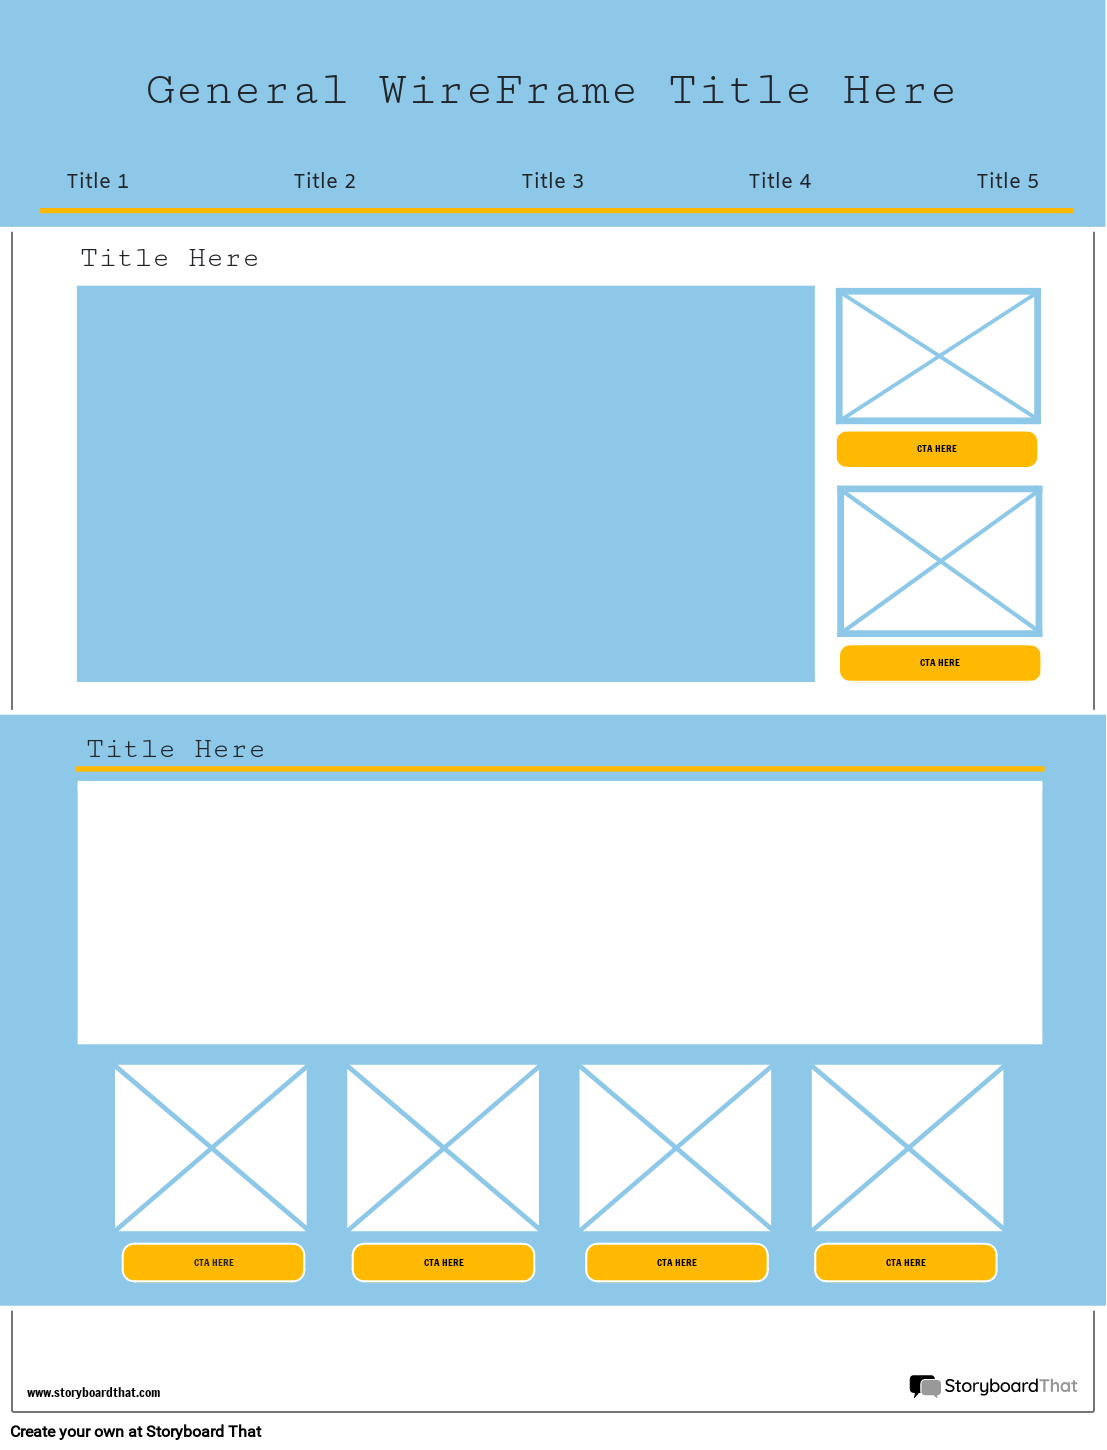 Corporate General WireFrame Template 2